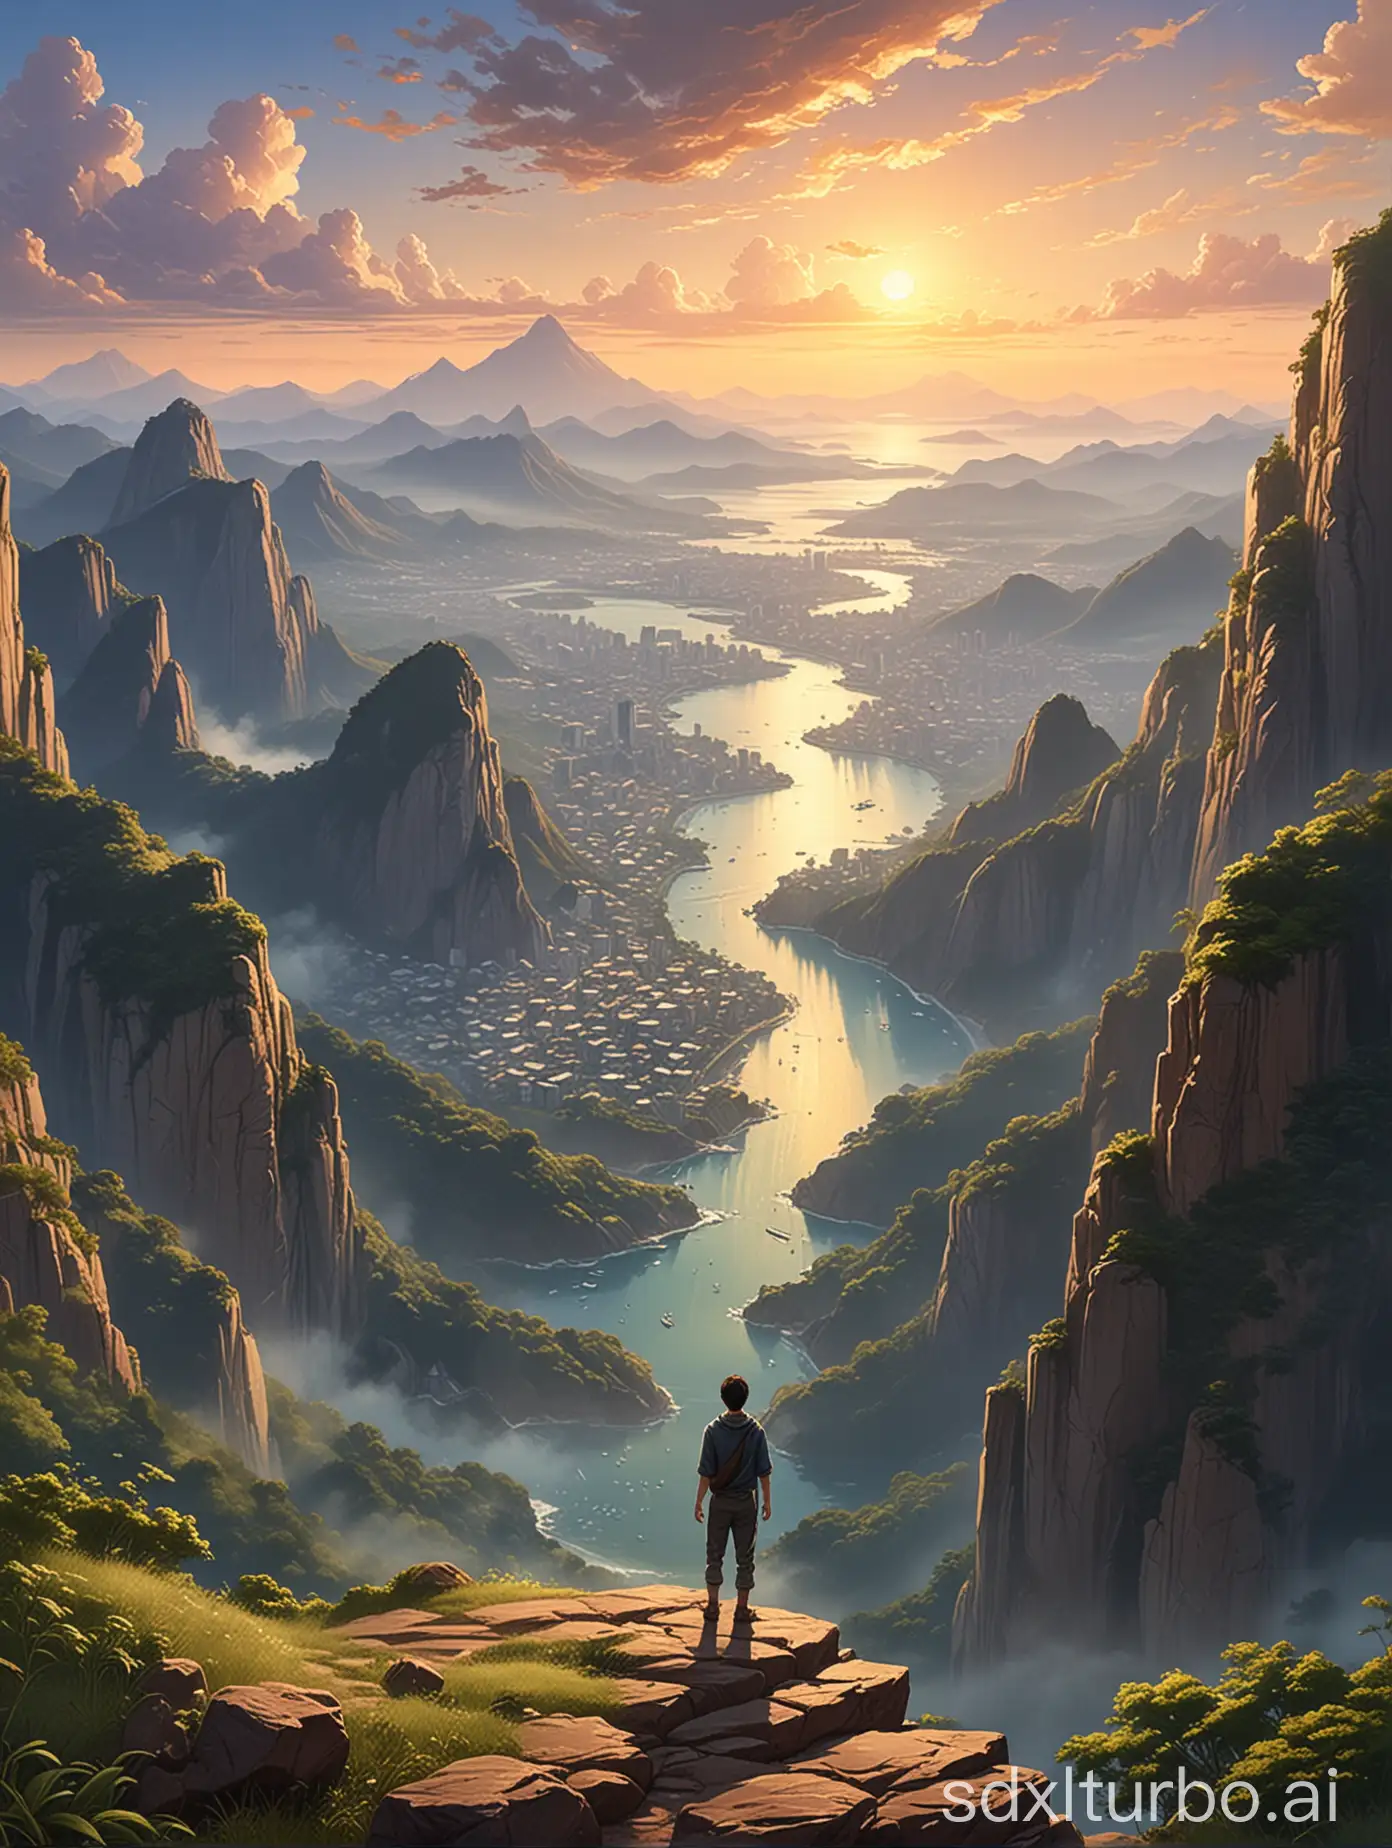 Man-Standing-on-Mountain-Anime-Landscape-Inspired-by-Rio-de-Janeiro